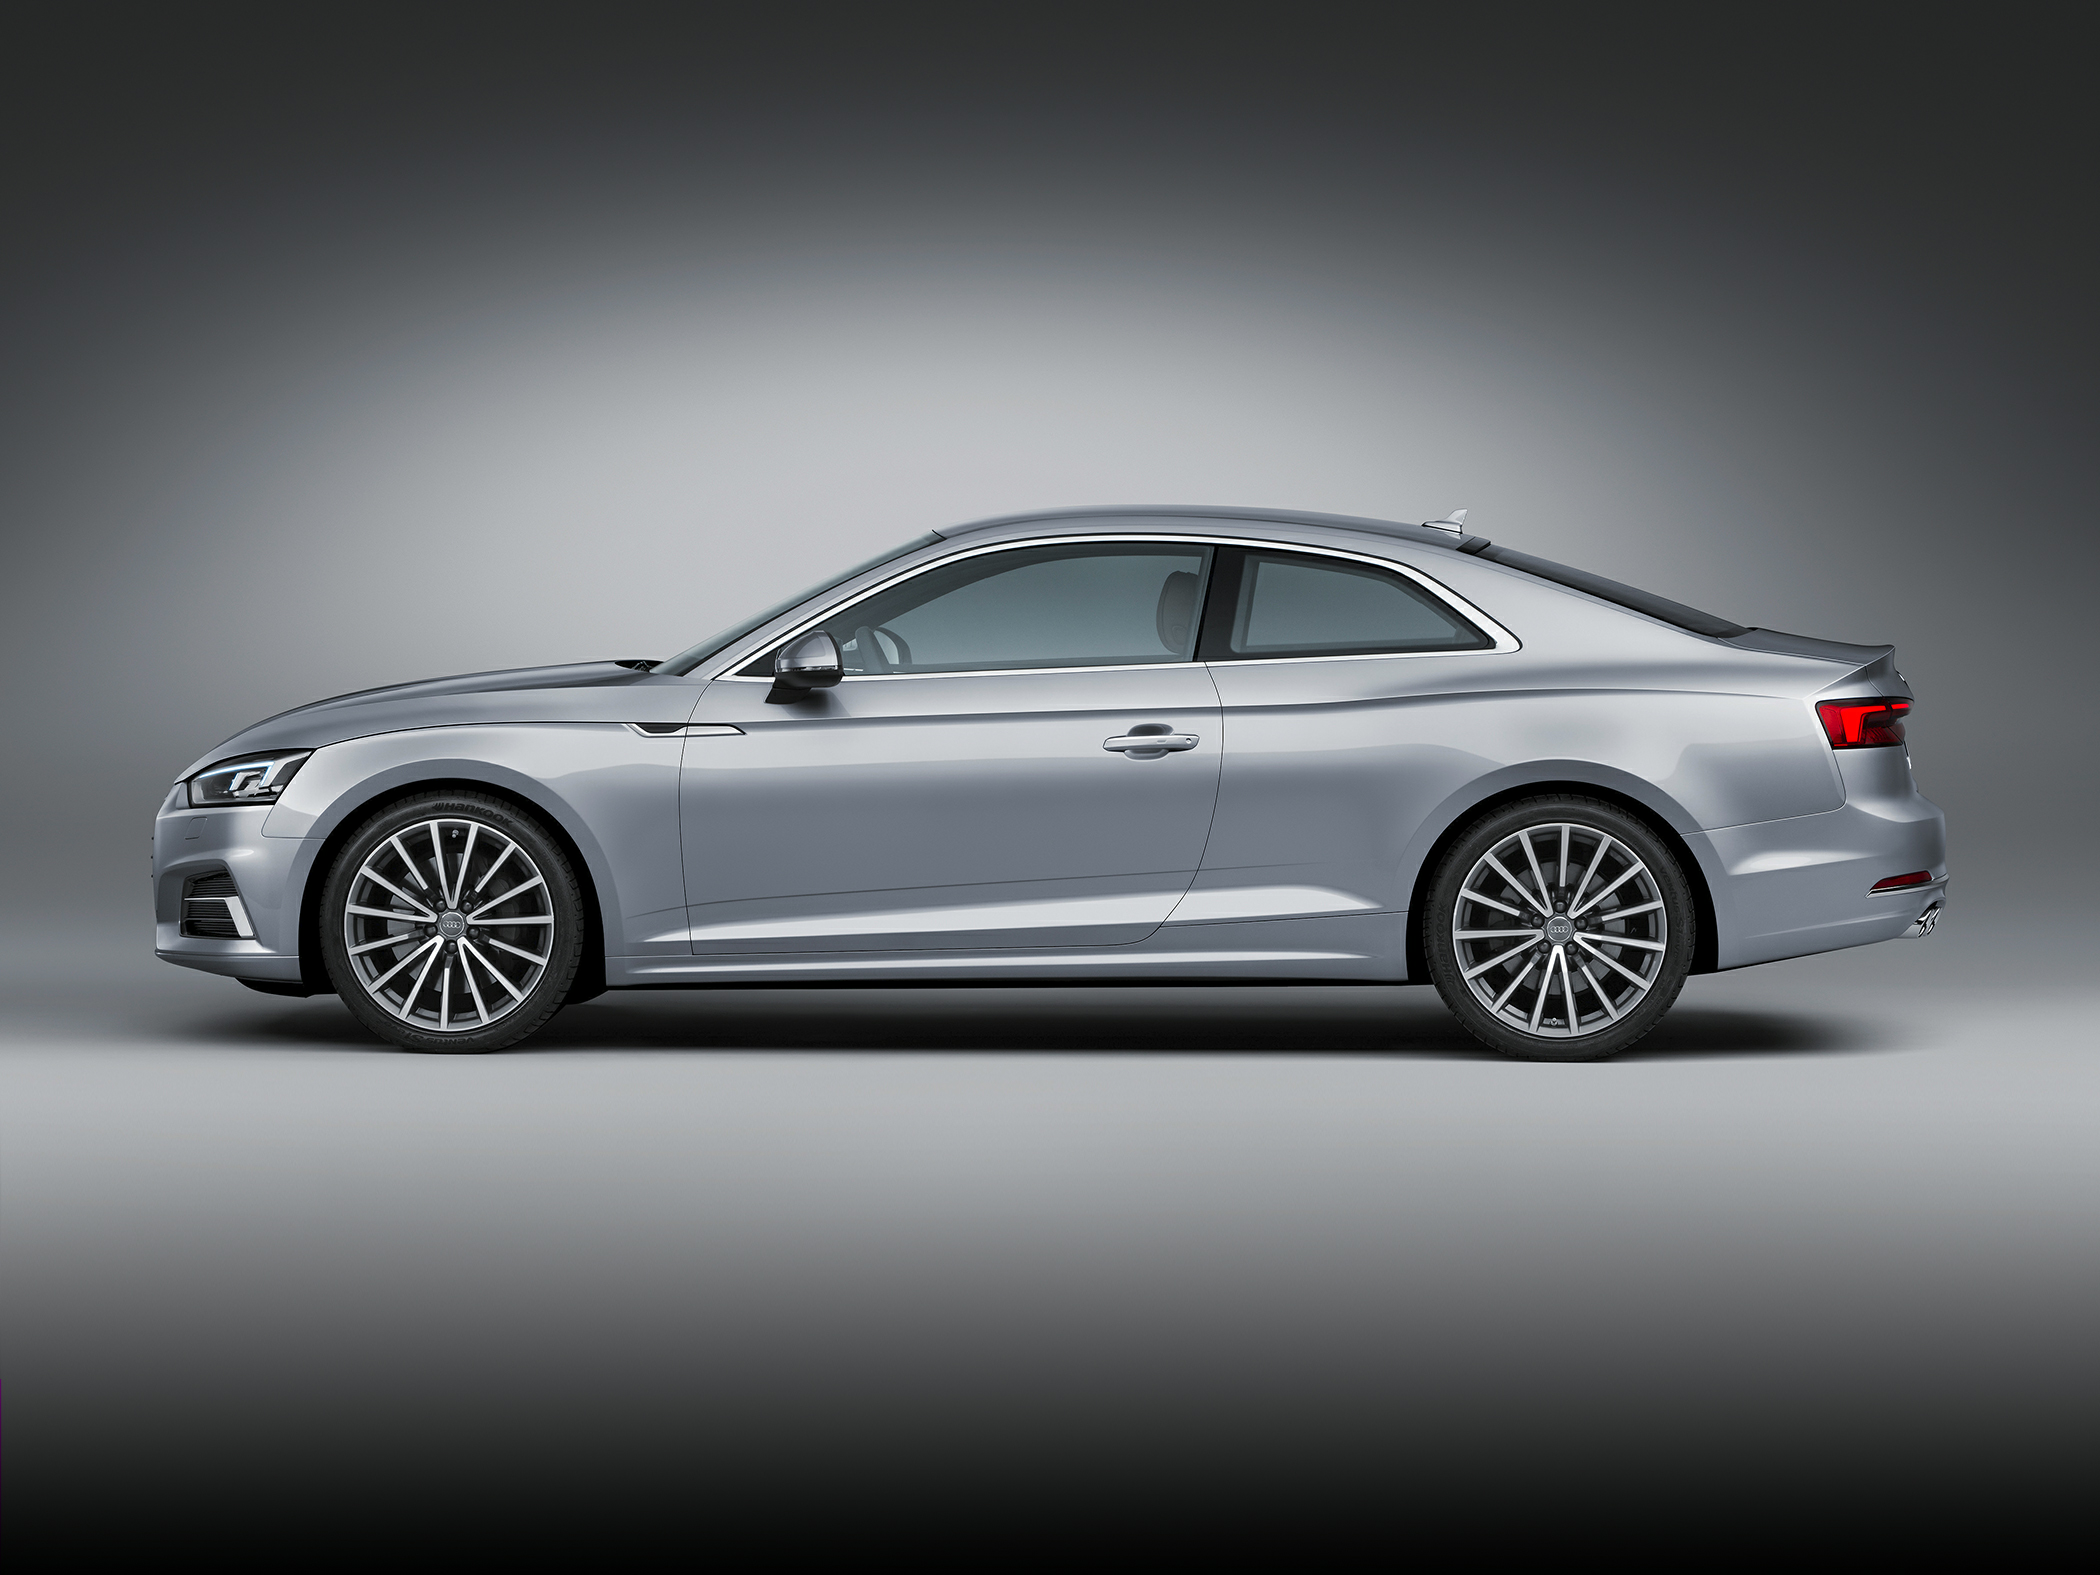 2018 Audi A5 Prices, Reviews, and Photos - MotorTrend